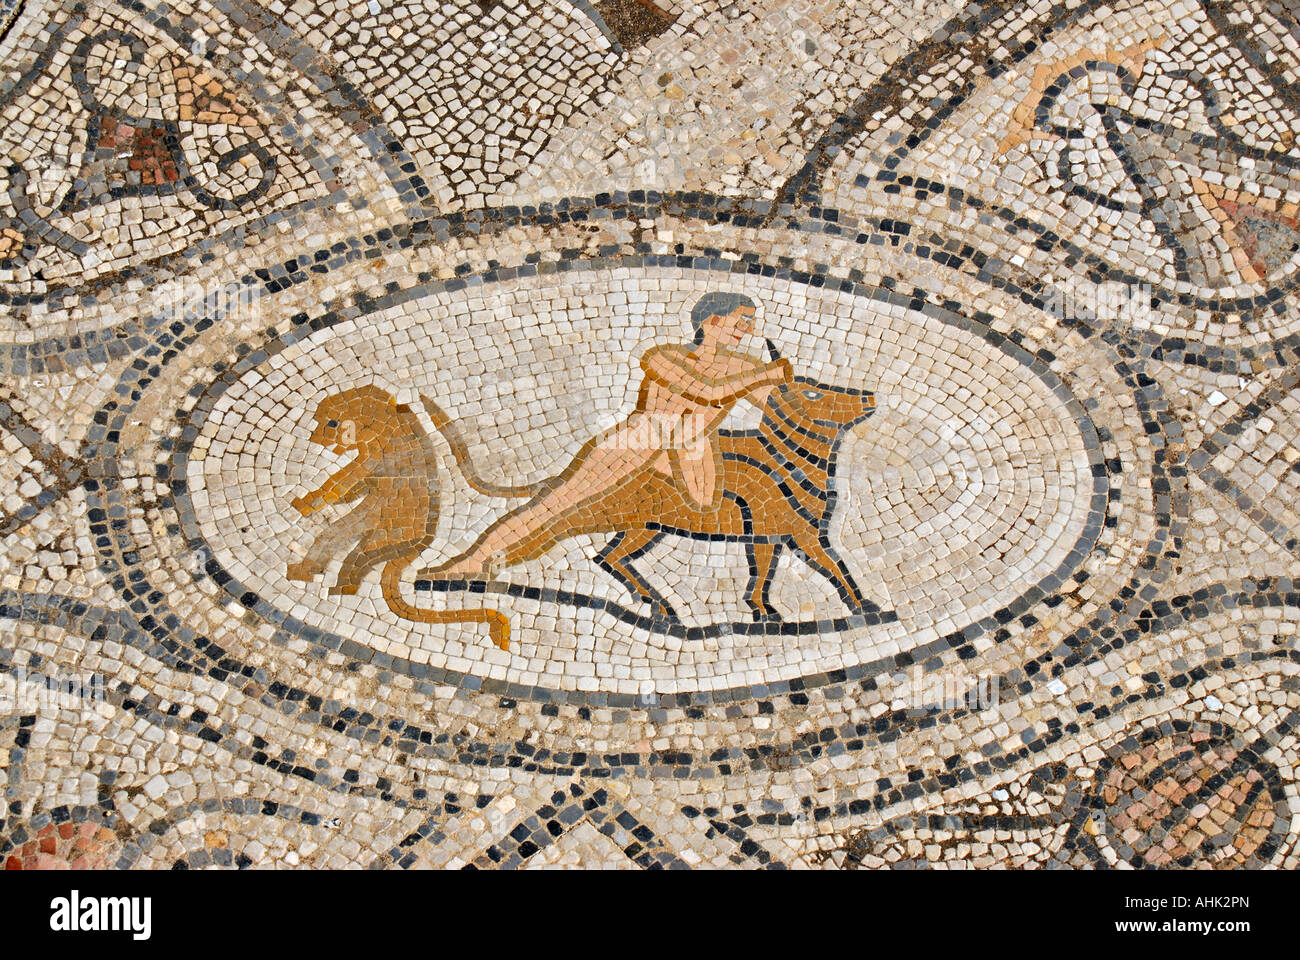 Detail of Mosaics of Hercules and Cretan Bull at House of Labors of Hercules in the Ruined Roman City of Volubilis, Morocco Stock Photo